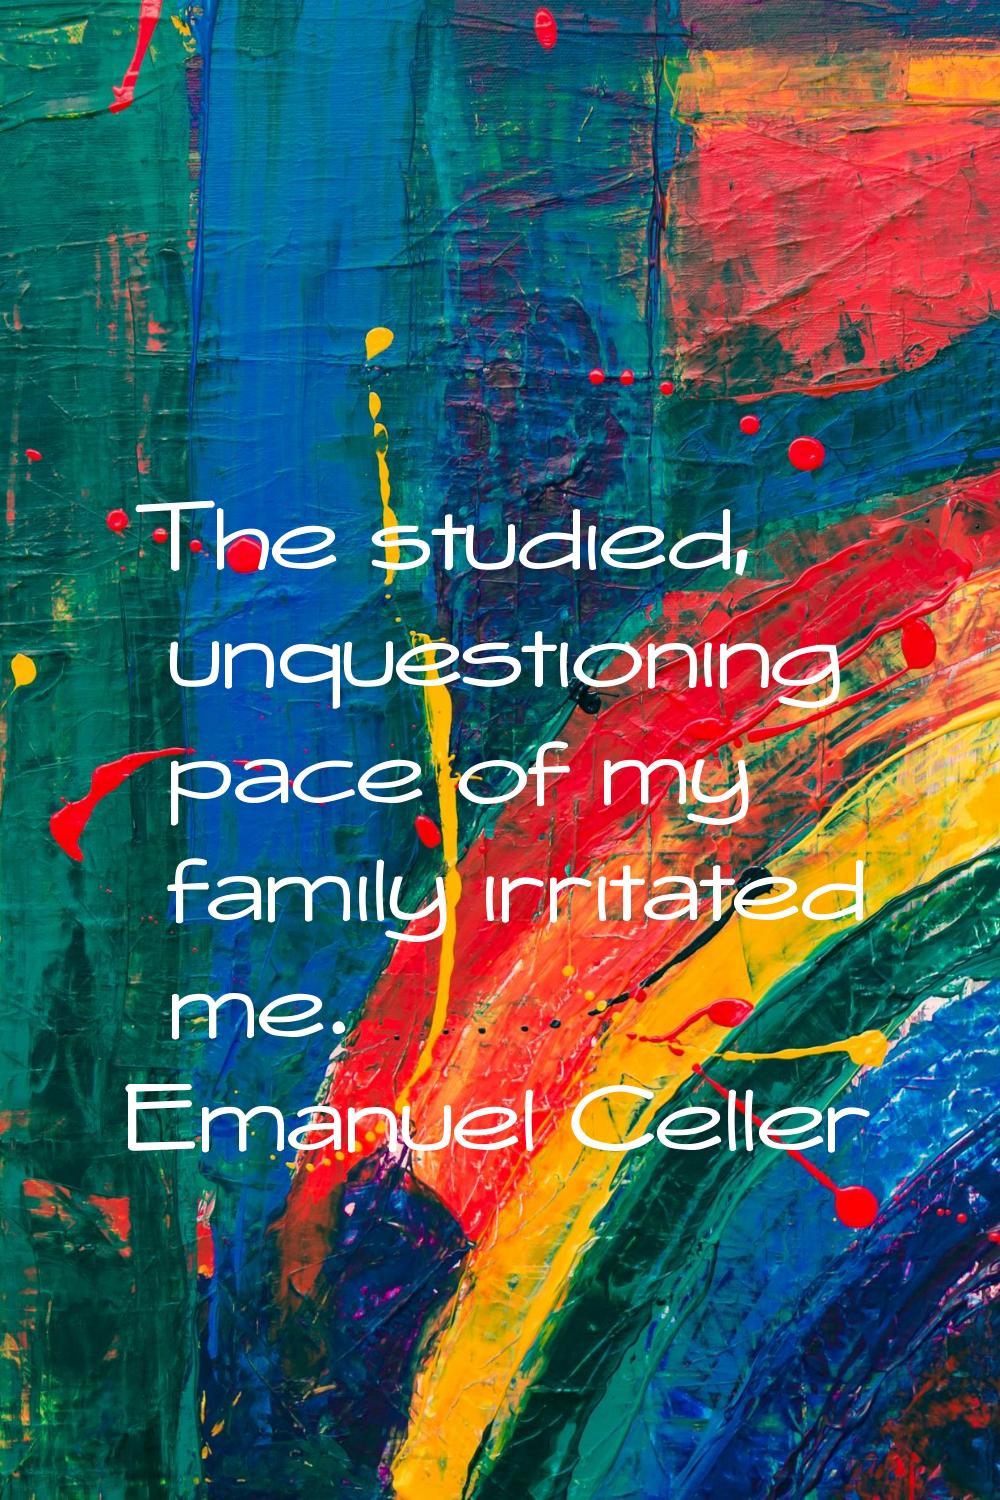 The studied, unquestioning pace of my family irritated me.